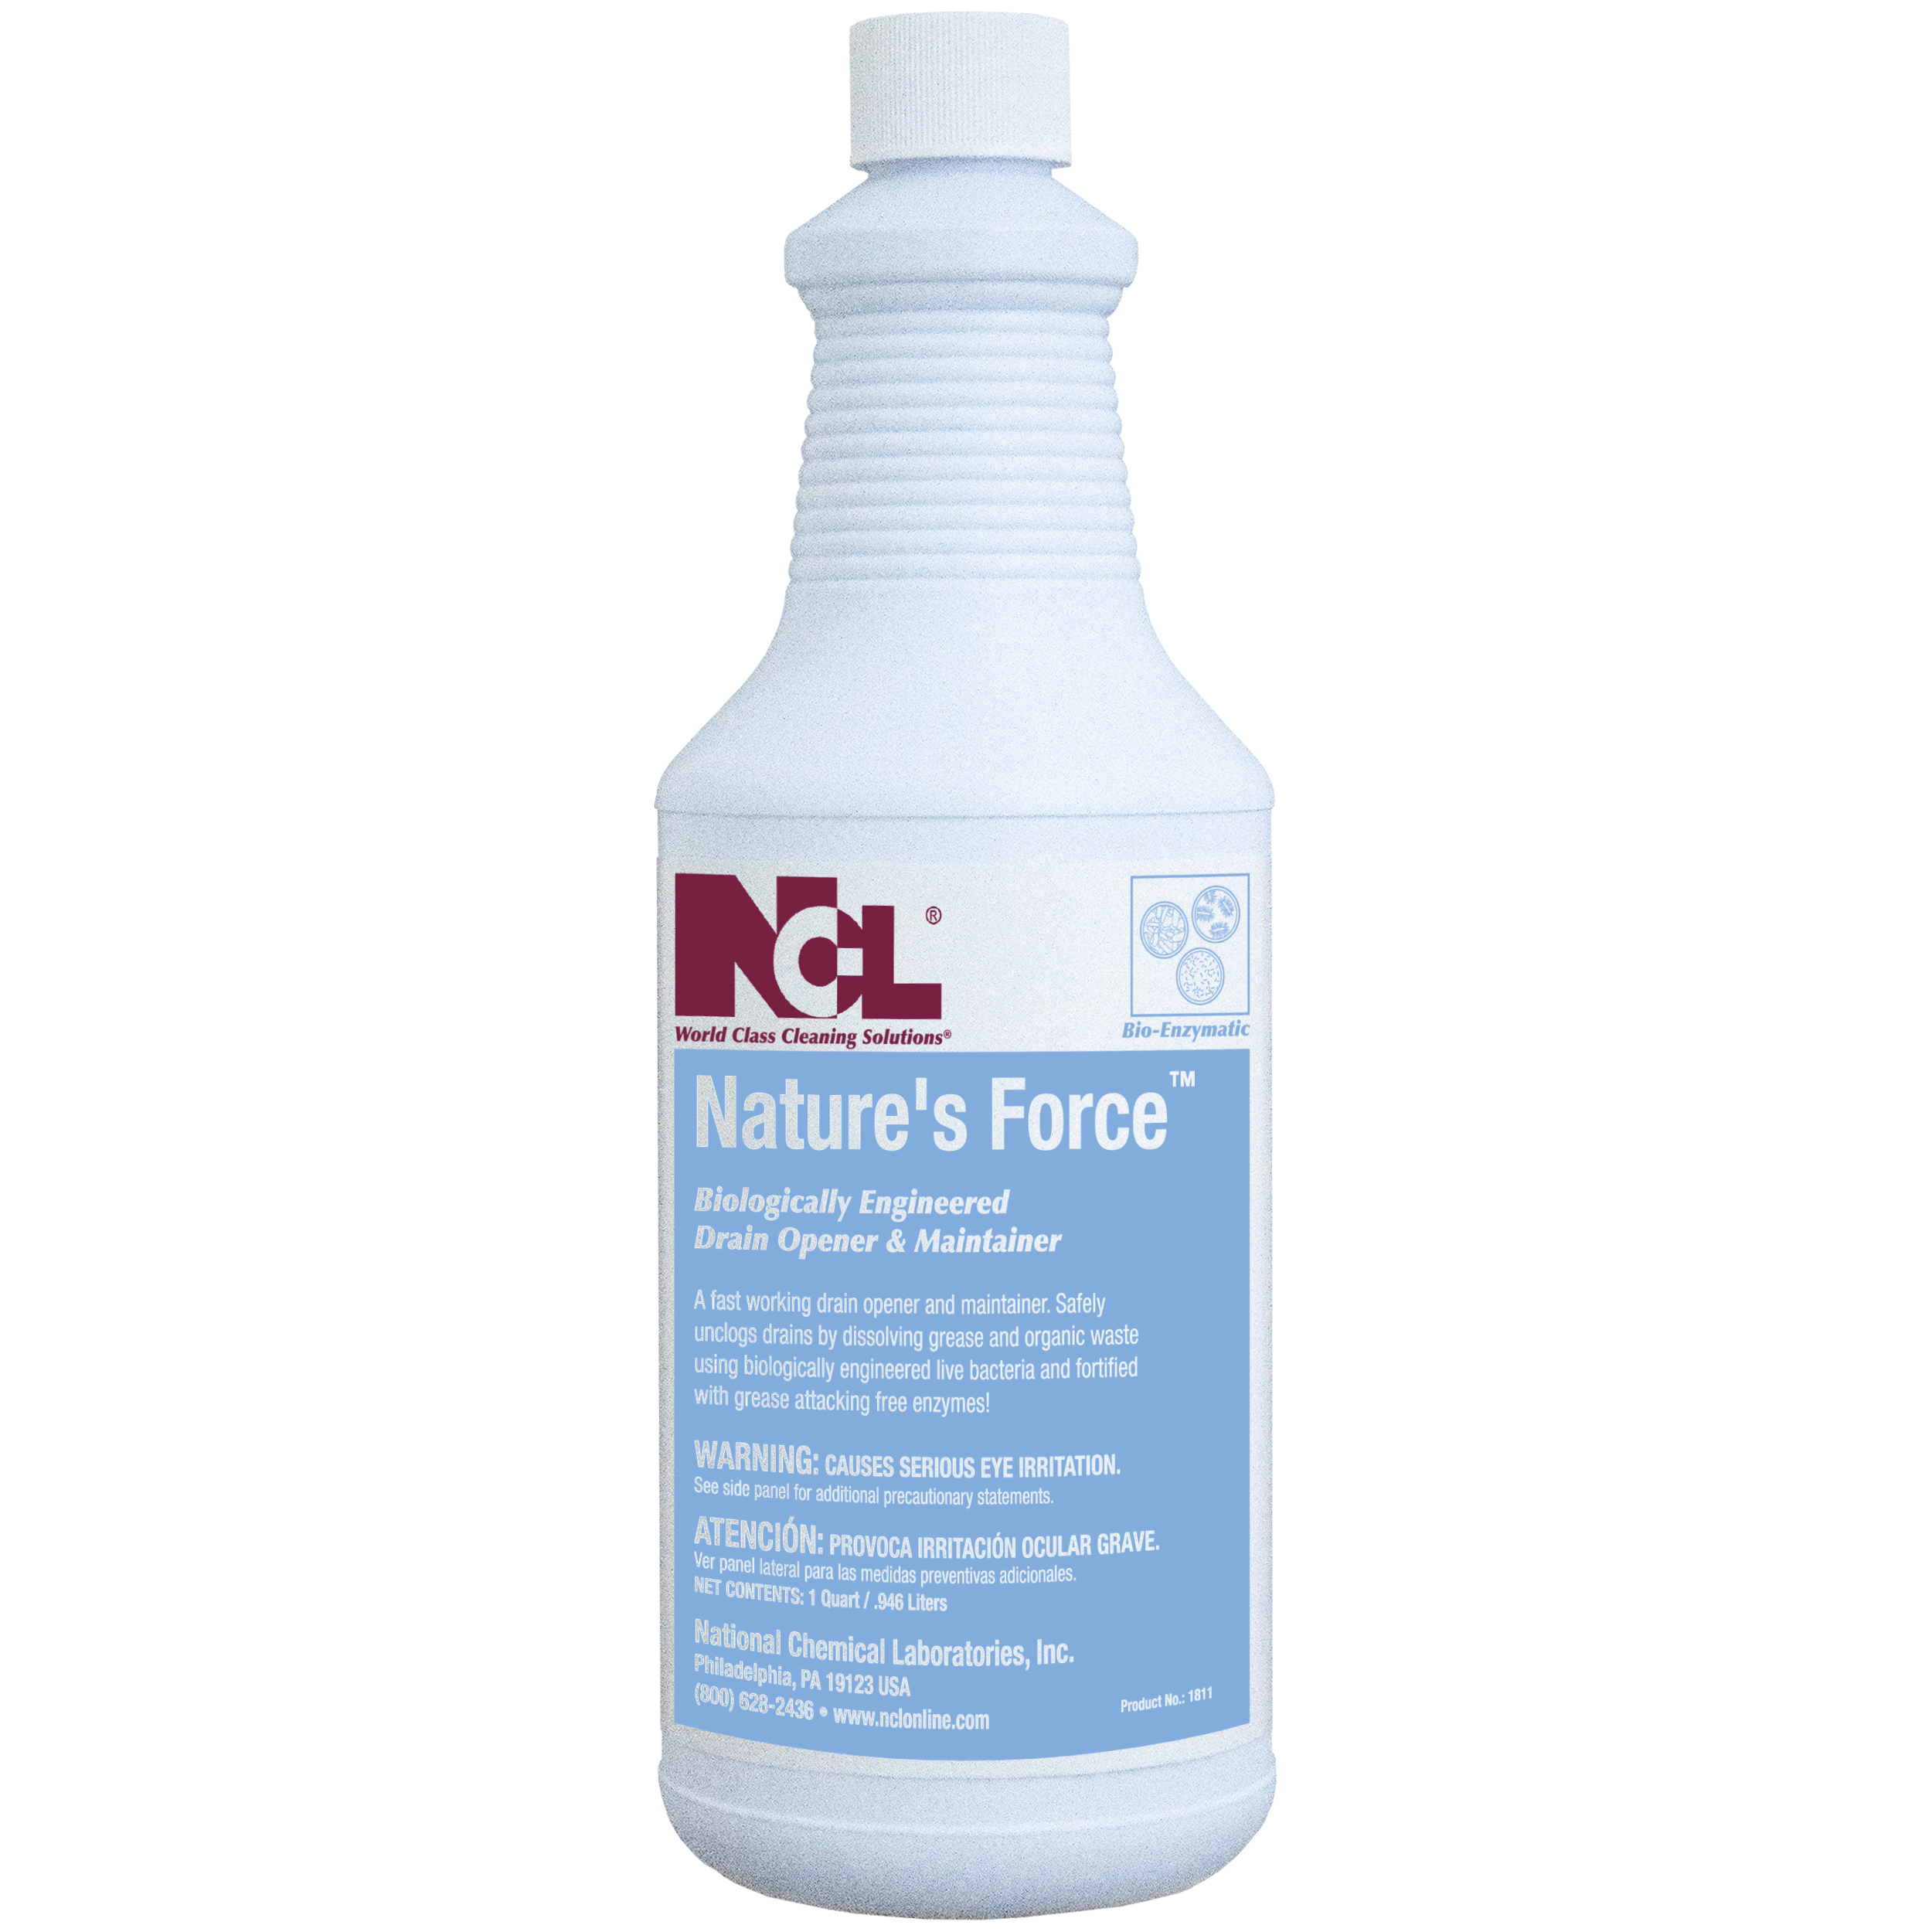  NATURE'S FORCE Bio-Enzymatic Drain Opener and Maintainer 12/32 oz (1 Qt.) Case (NCL1811-45) 